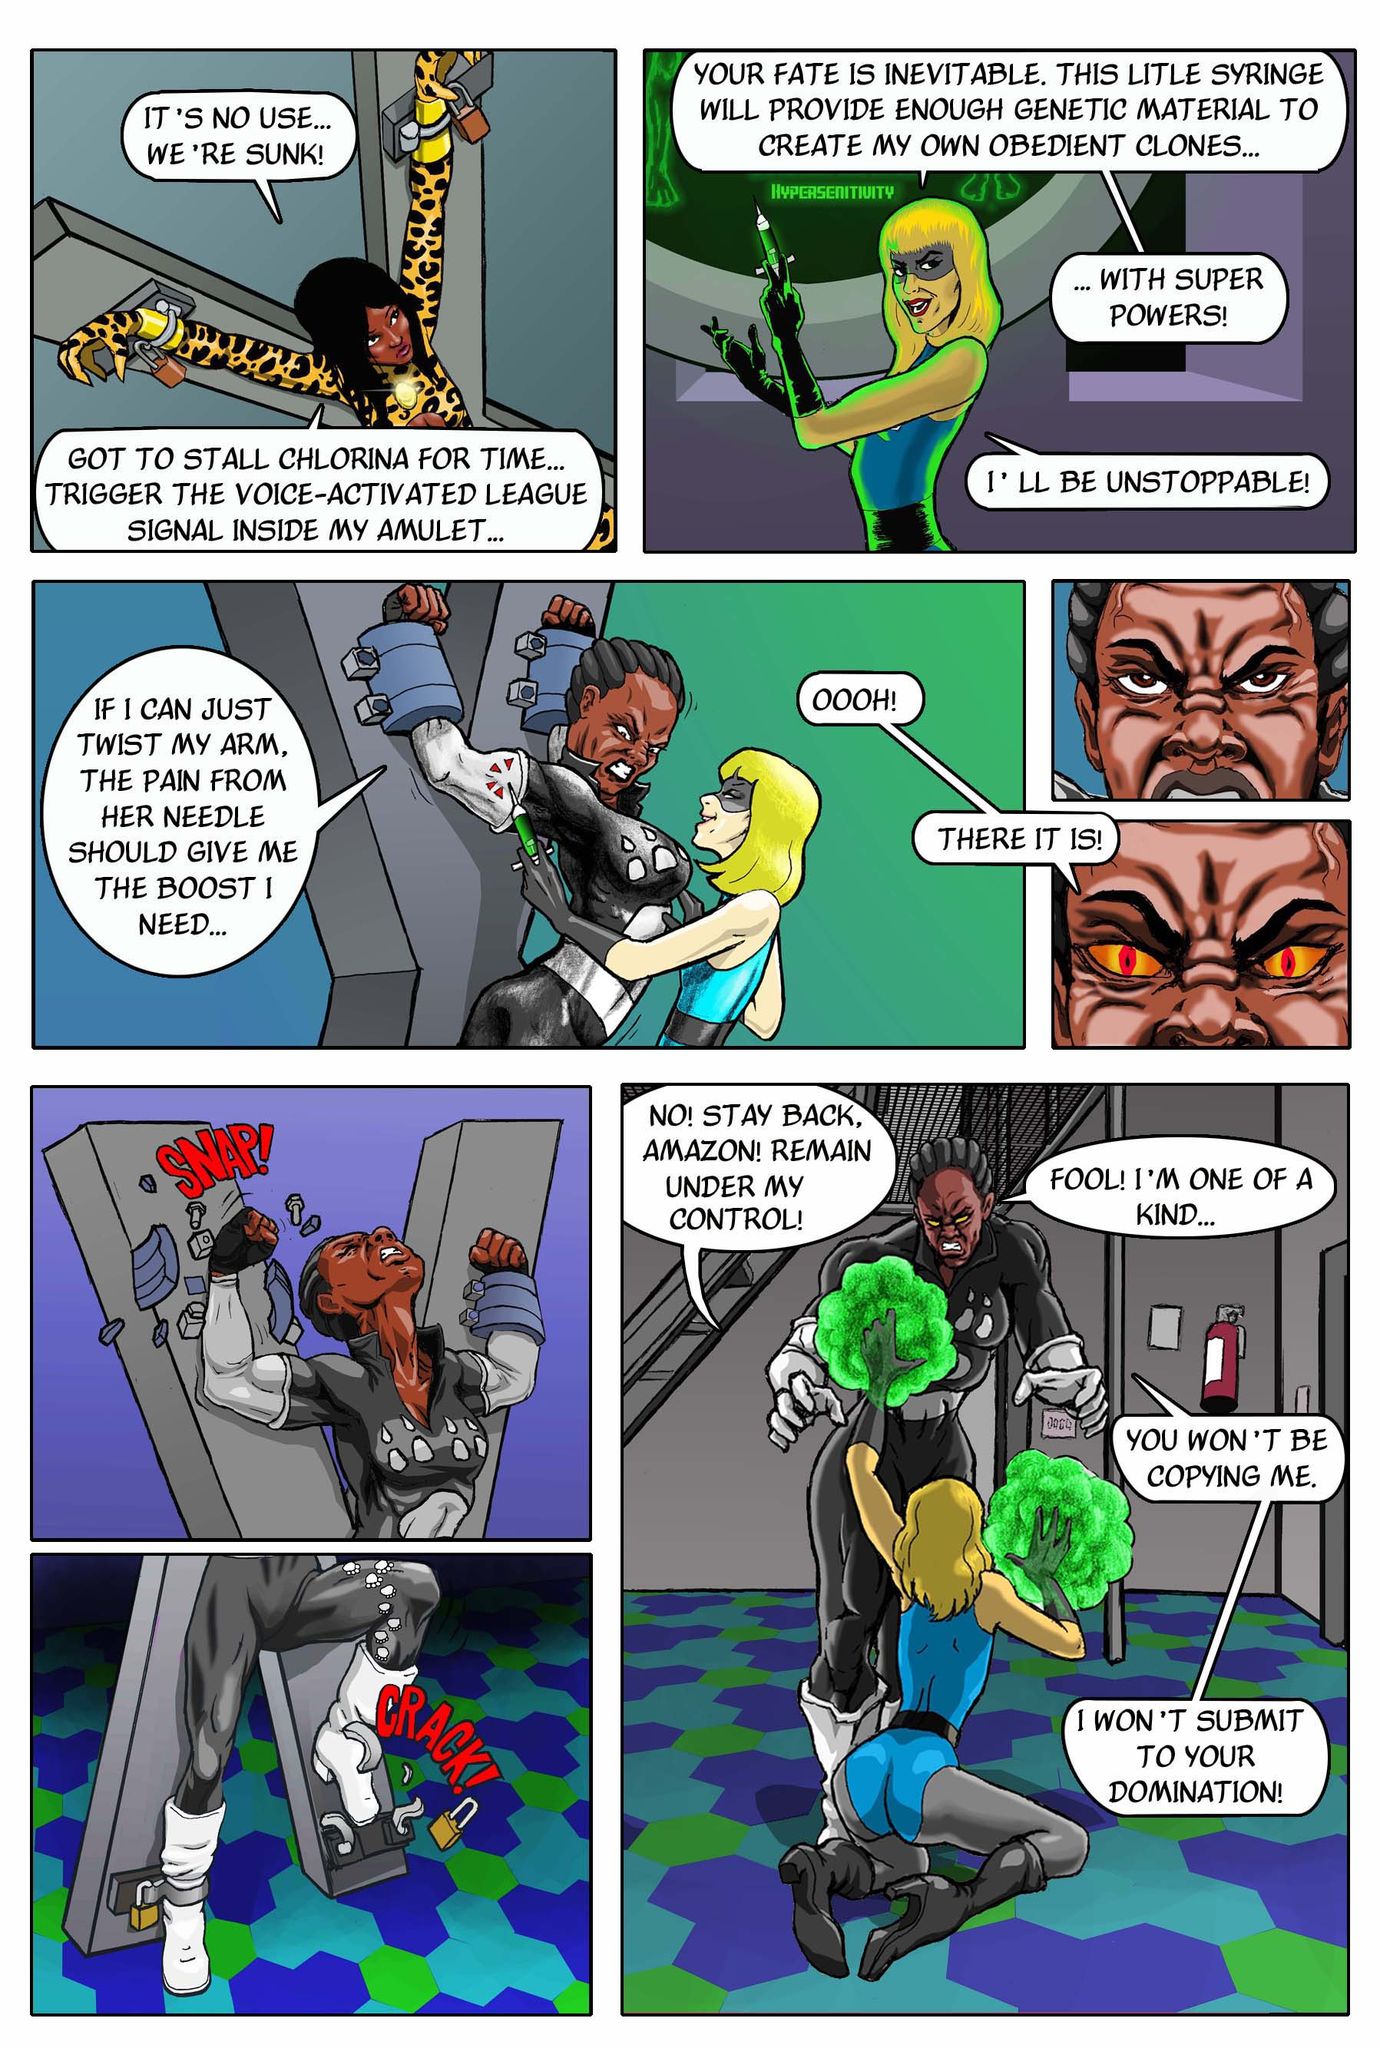 issue 3 page 3 complete except for error.jpg